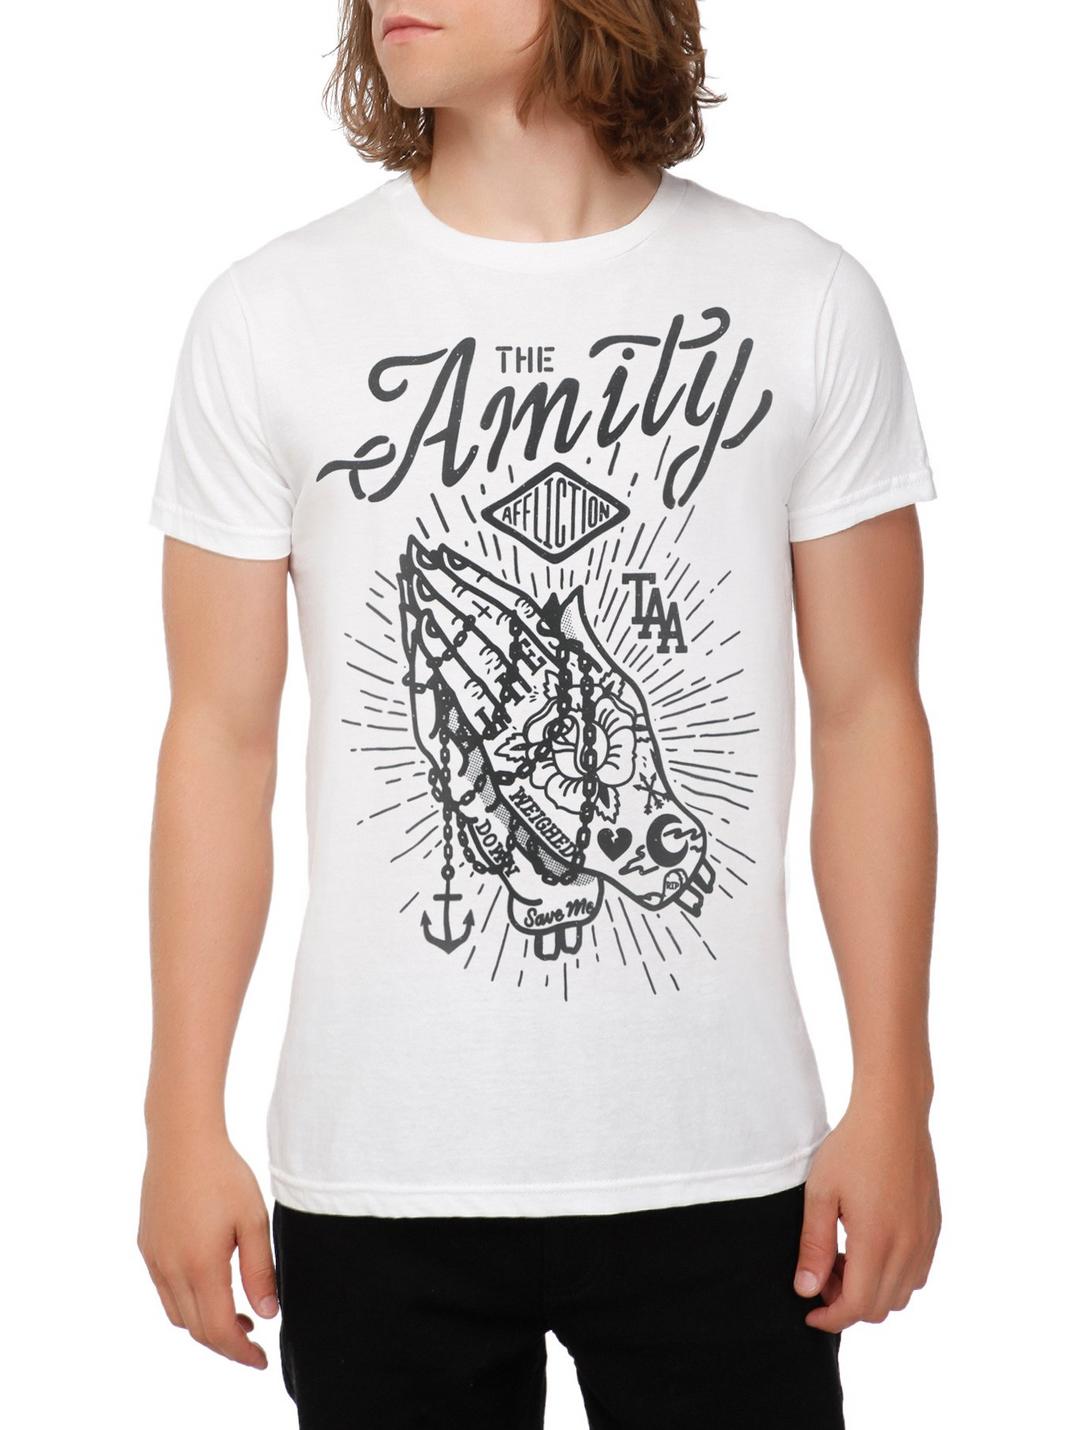 The Amity Affliction Praying Hands T-Shirt, WHITE, hi-res